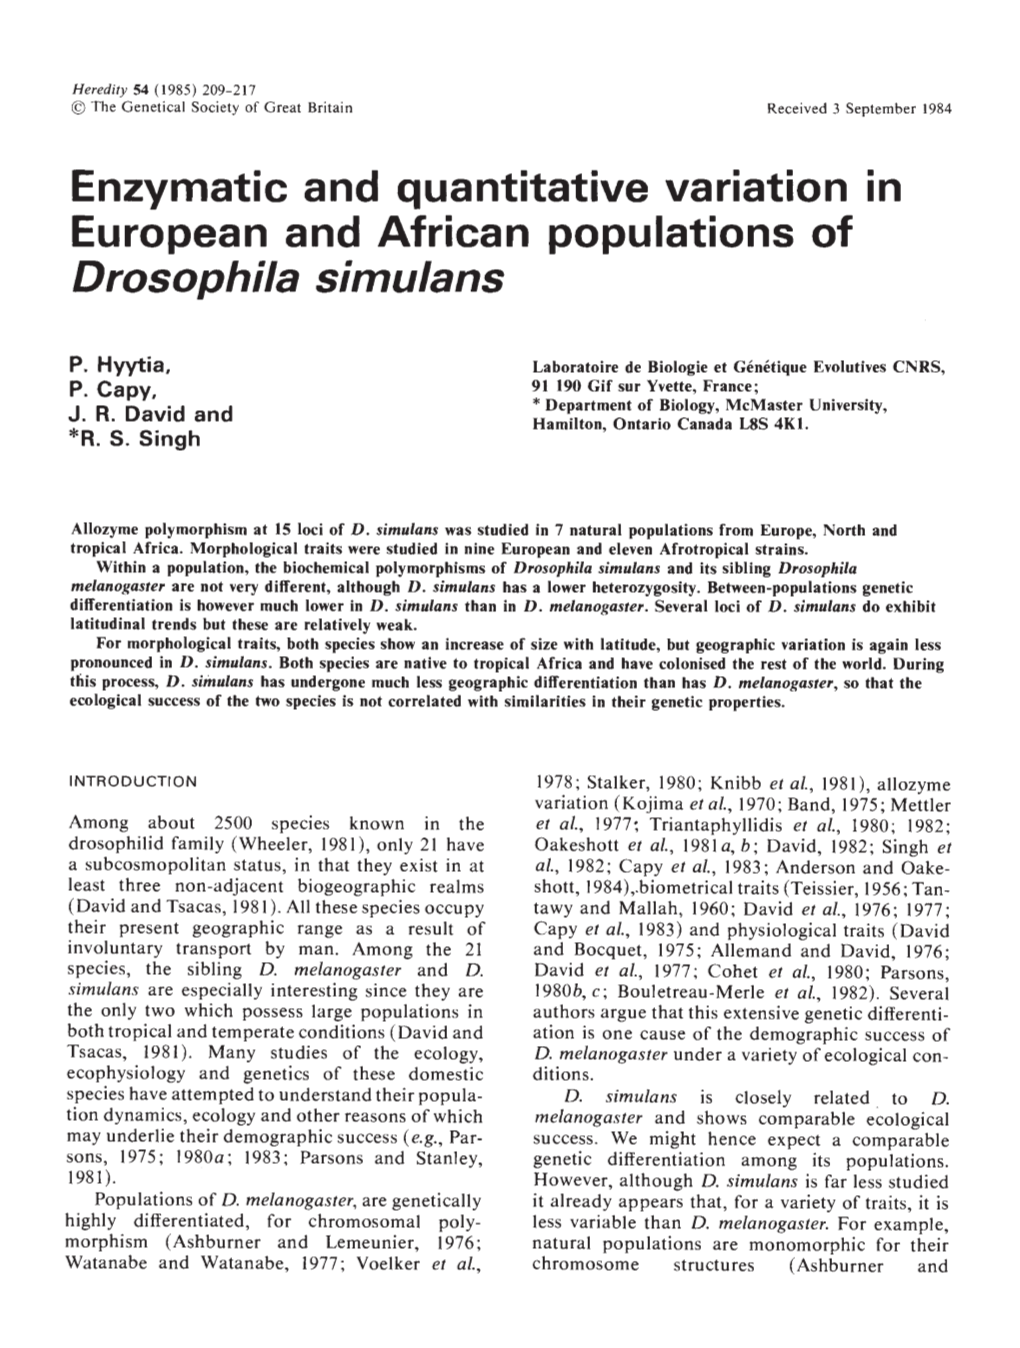 Enzymatic and Quantitative Variation in European and African Populations of Drosophila Simulans